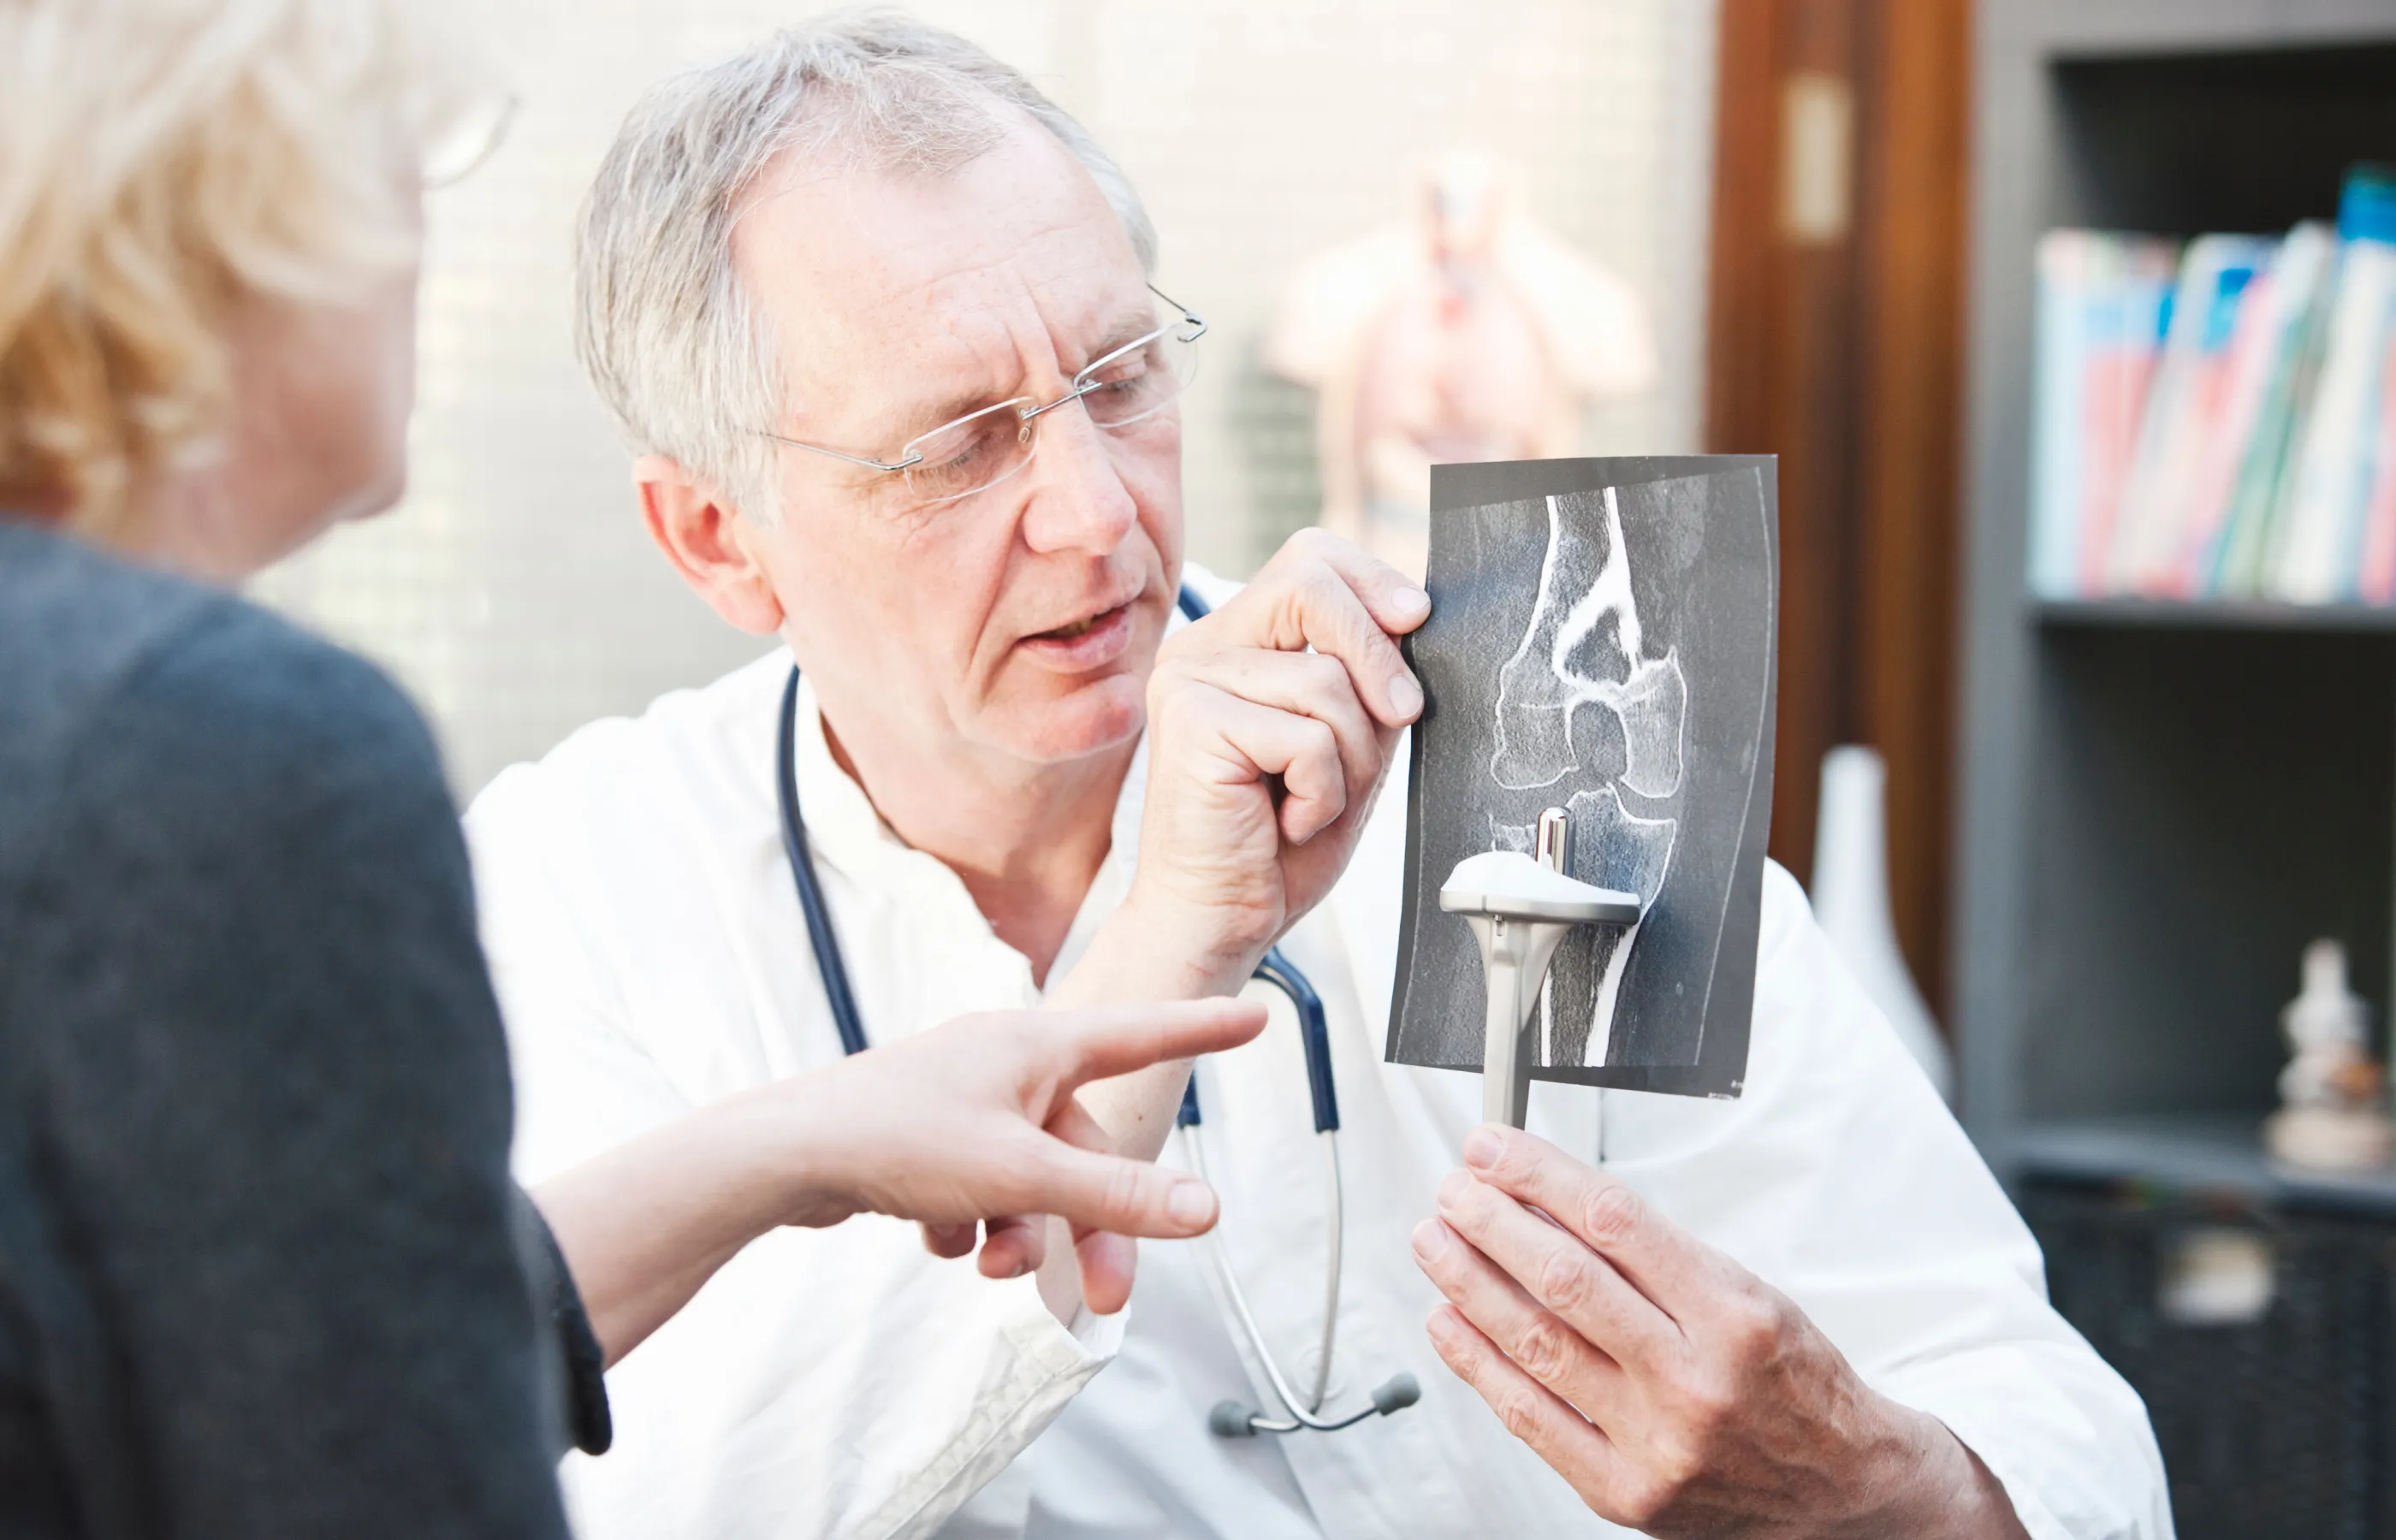 A doctor explains an X-ray to a patient using a model bone